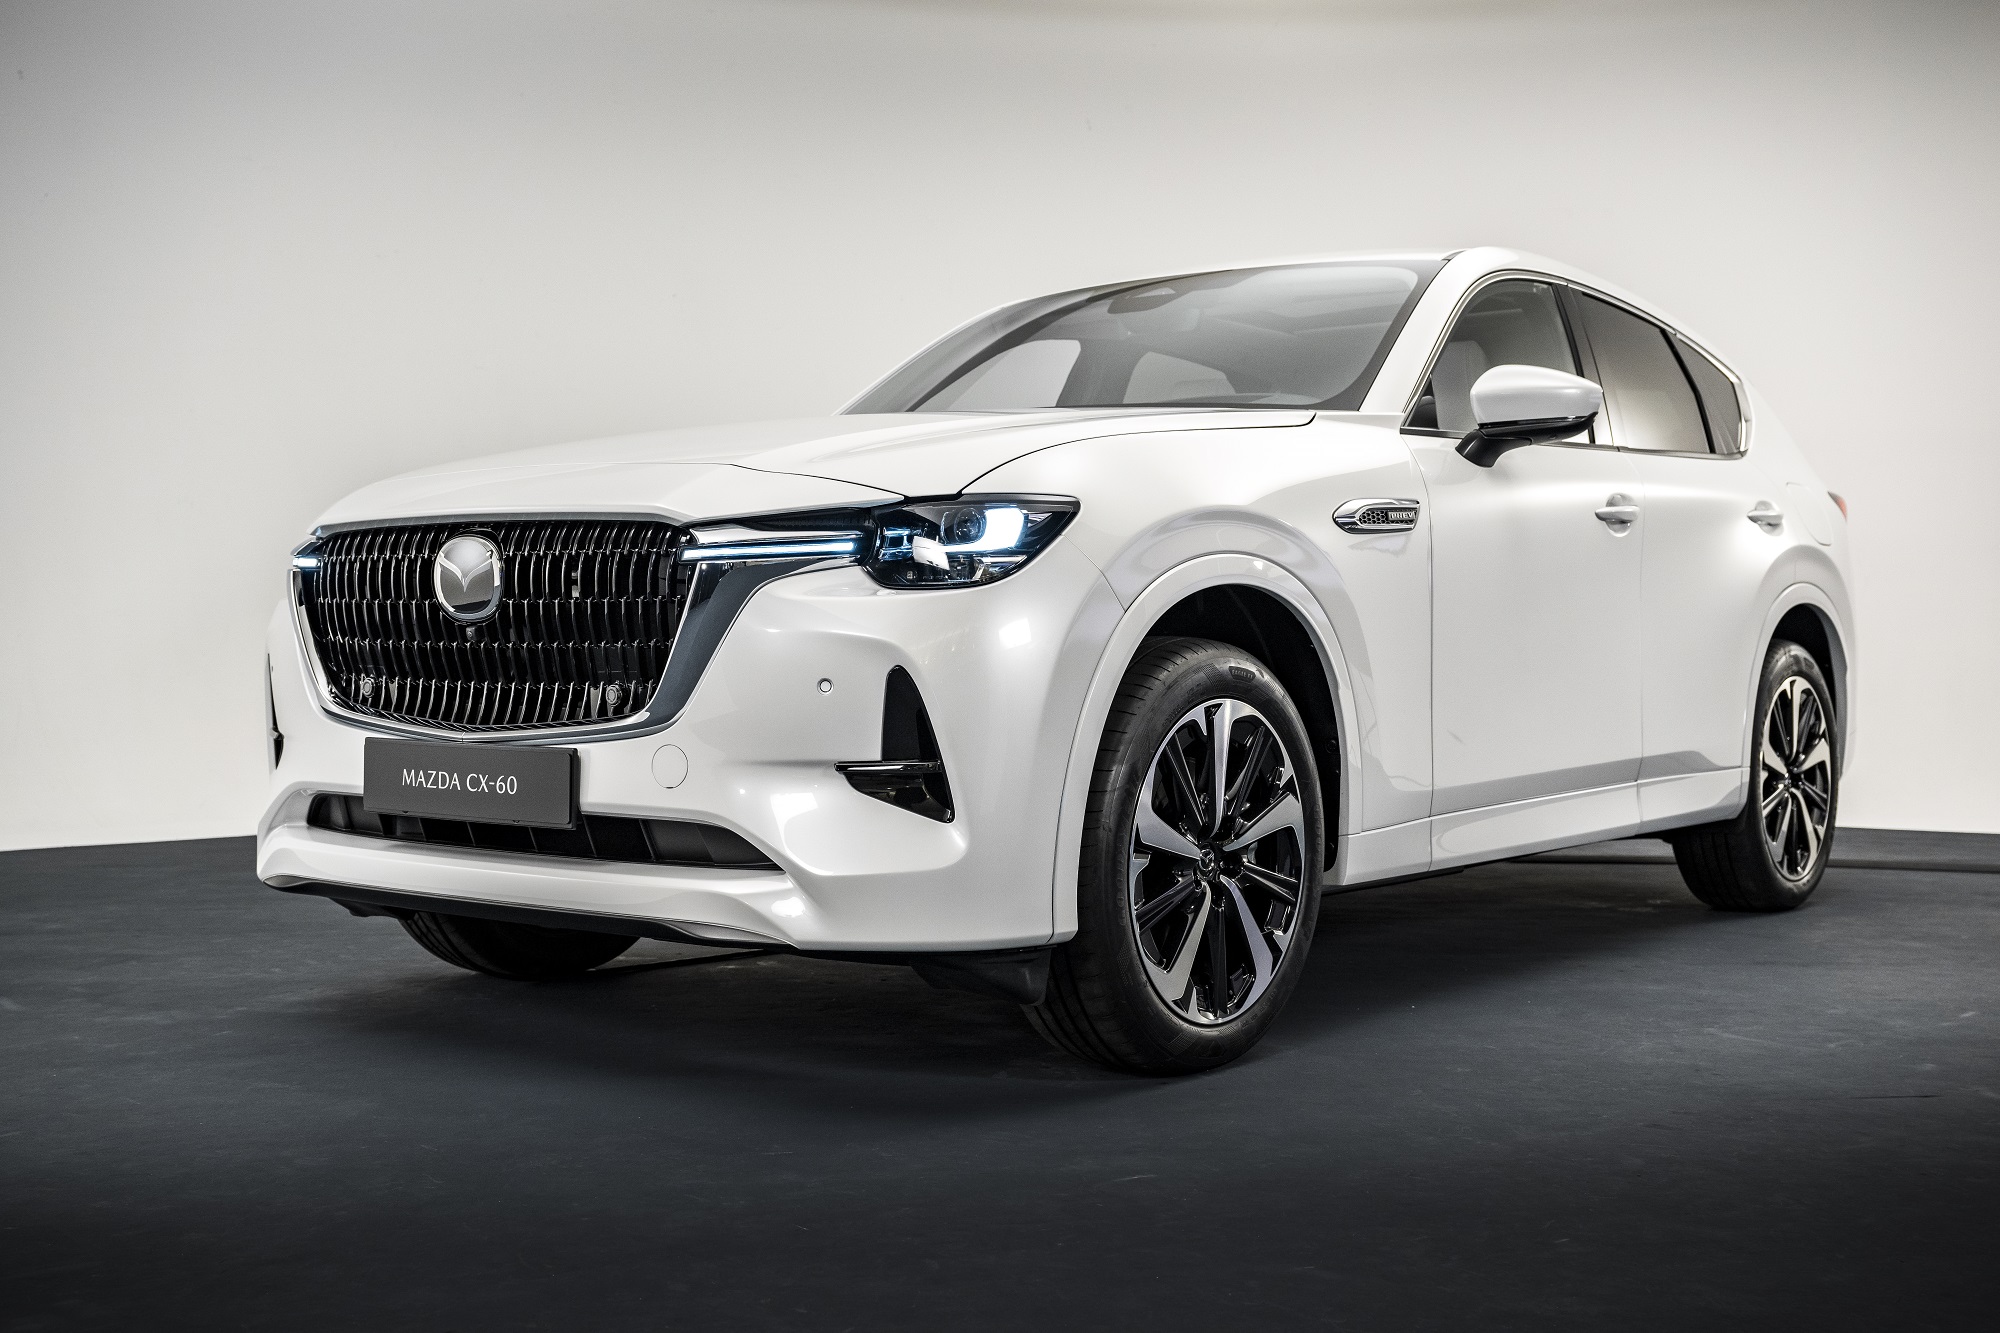 https://s1.cdn.autoevolution.com/images/news/2023-mazda-cx-60-launched-as-the-new-flagship-comes-as-phev-and-gas-or-diesel-mhev-183354_1.jpg